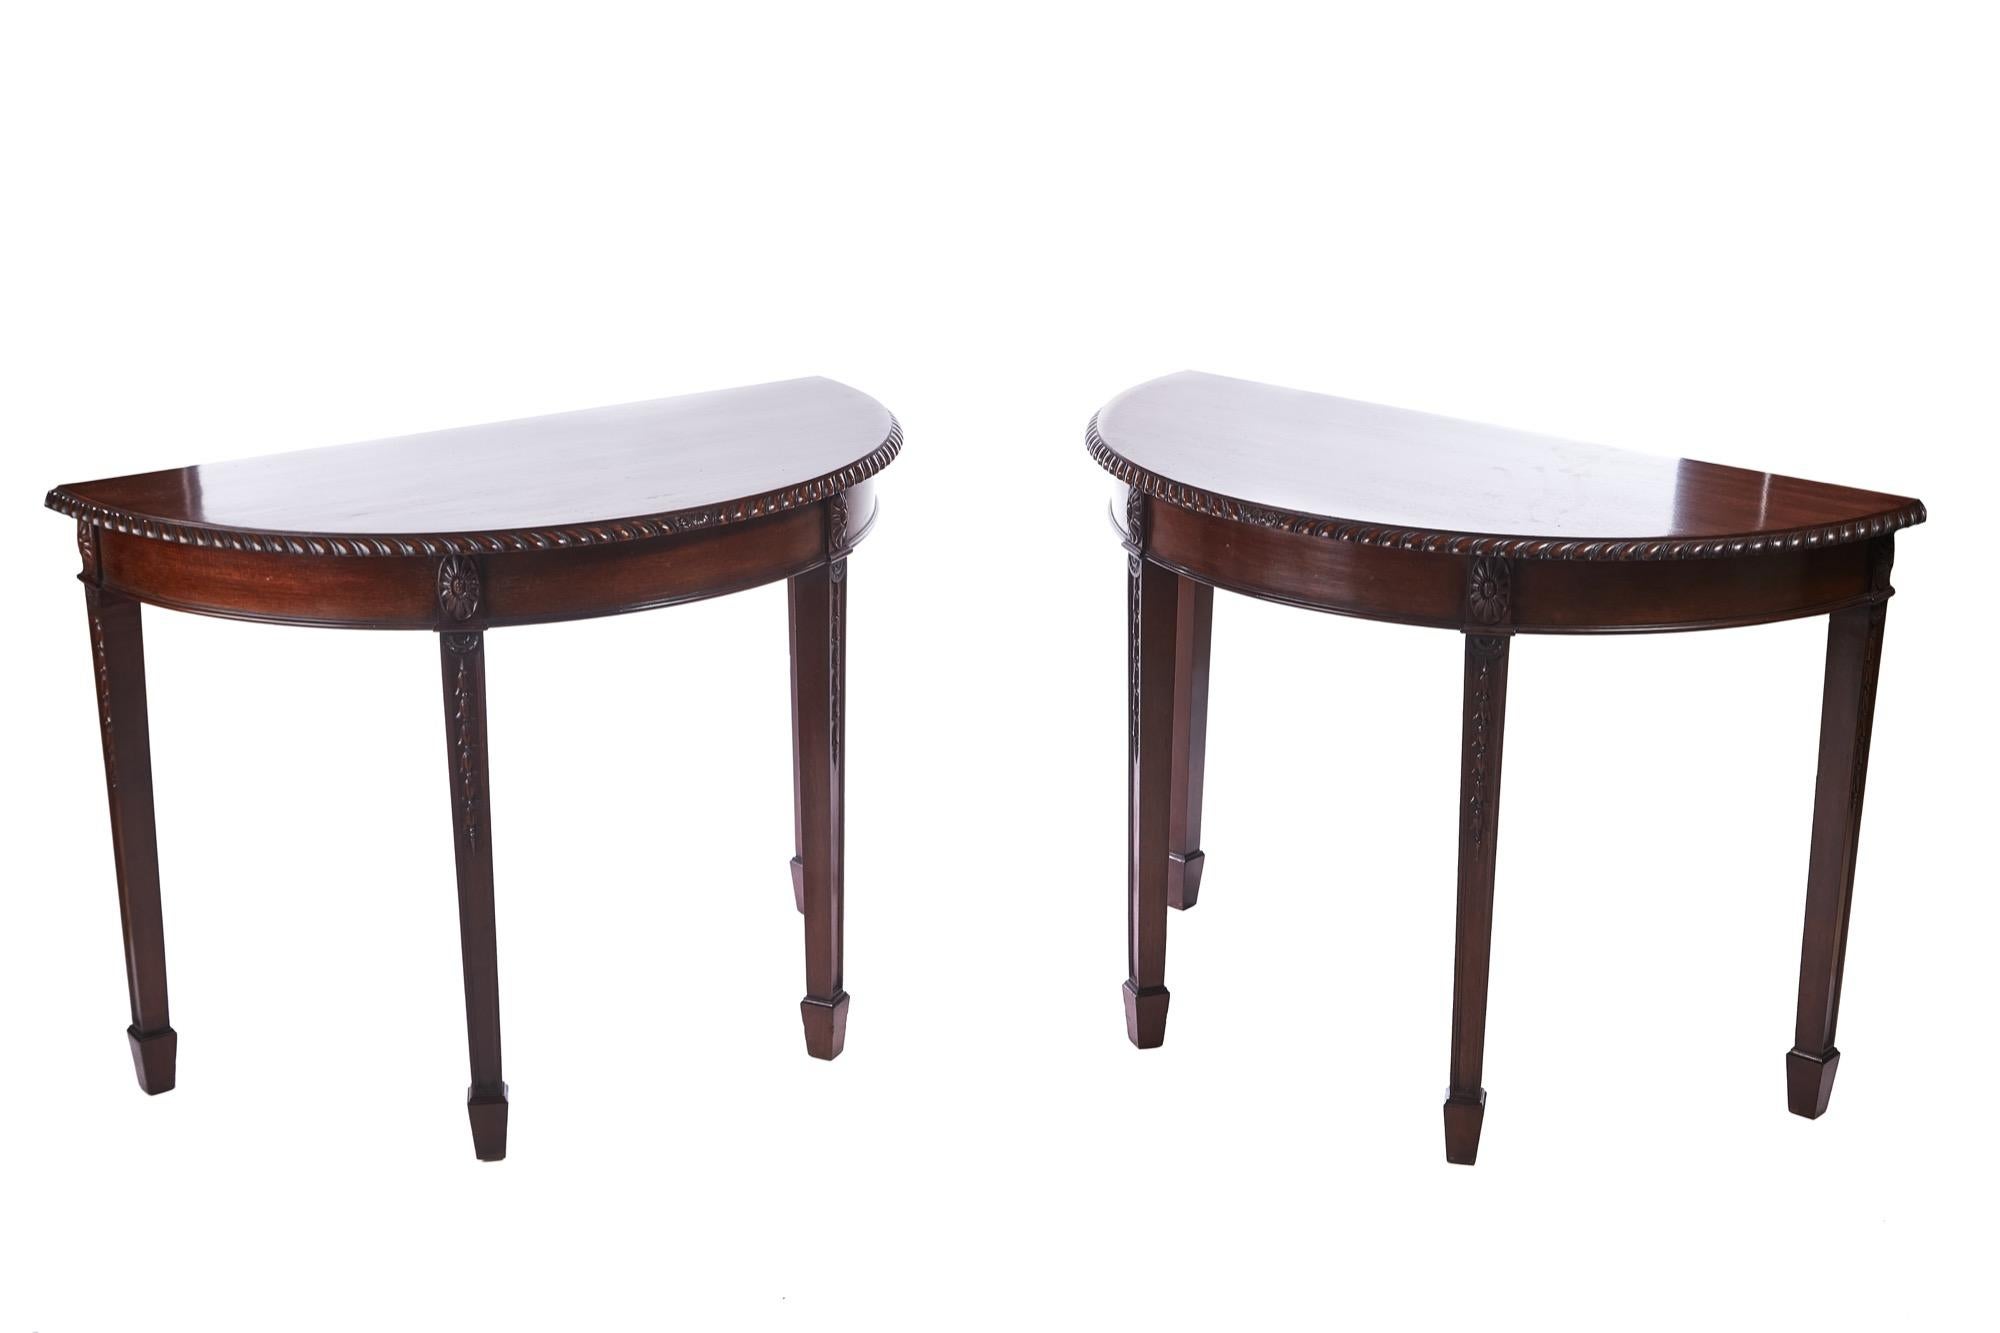 Pair of antique carved mahogany demilune console tables having lovely mahogany tops with a carved edge. Shaped apron standing on 4 carved reeded square tapering legs with spade feet.
Lovely color and condition.
Measures: 42